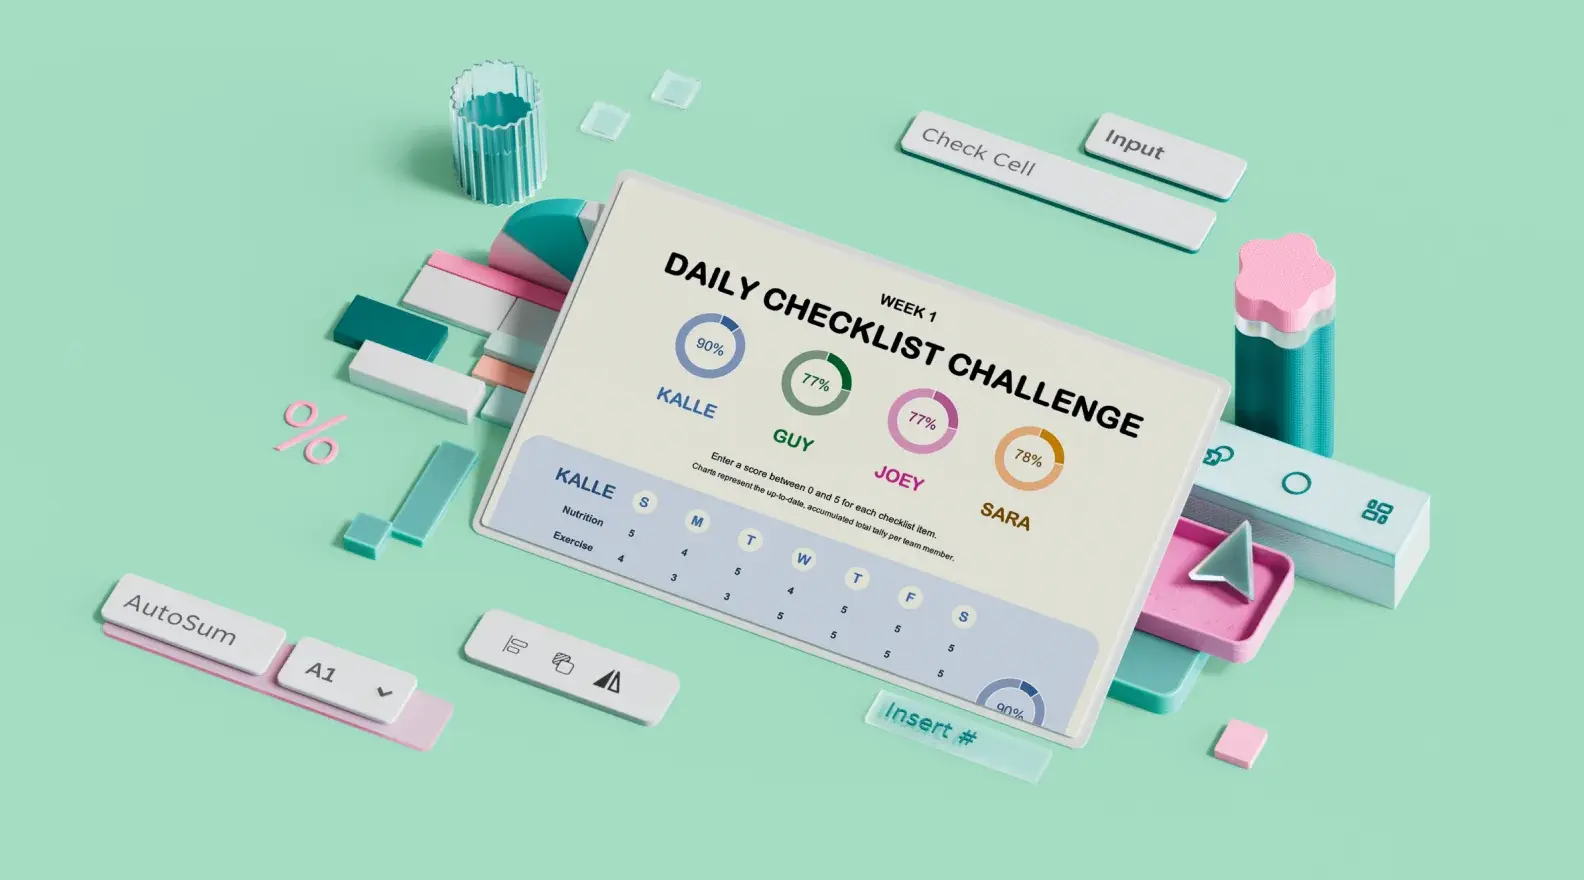 Health tracker daily checklist template surrounded by 3D design elements